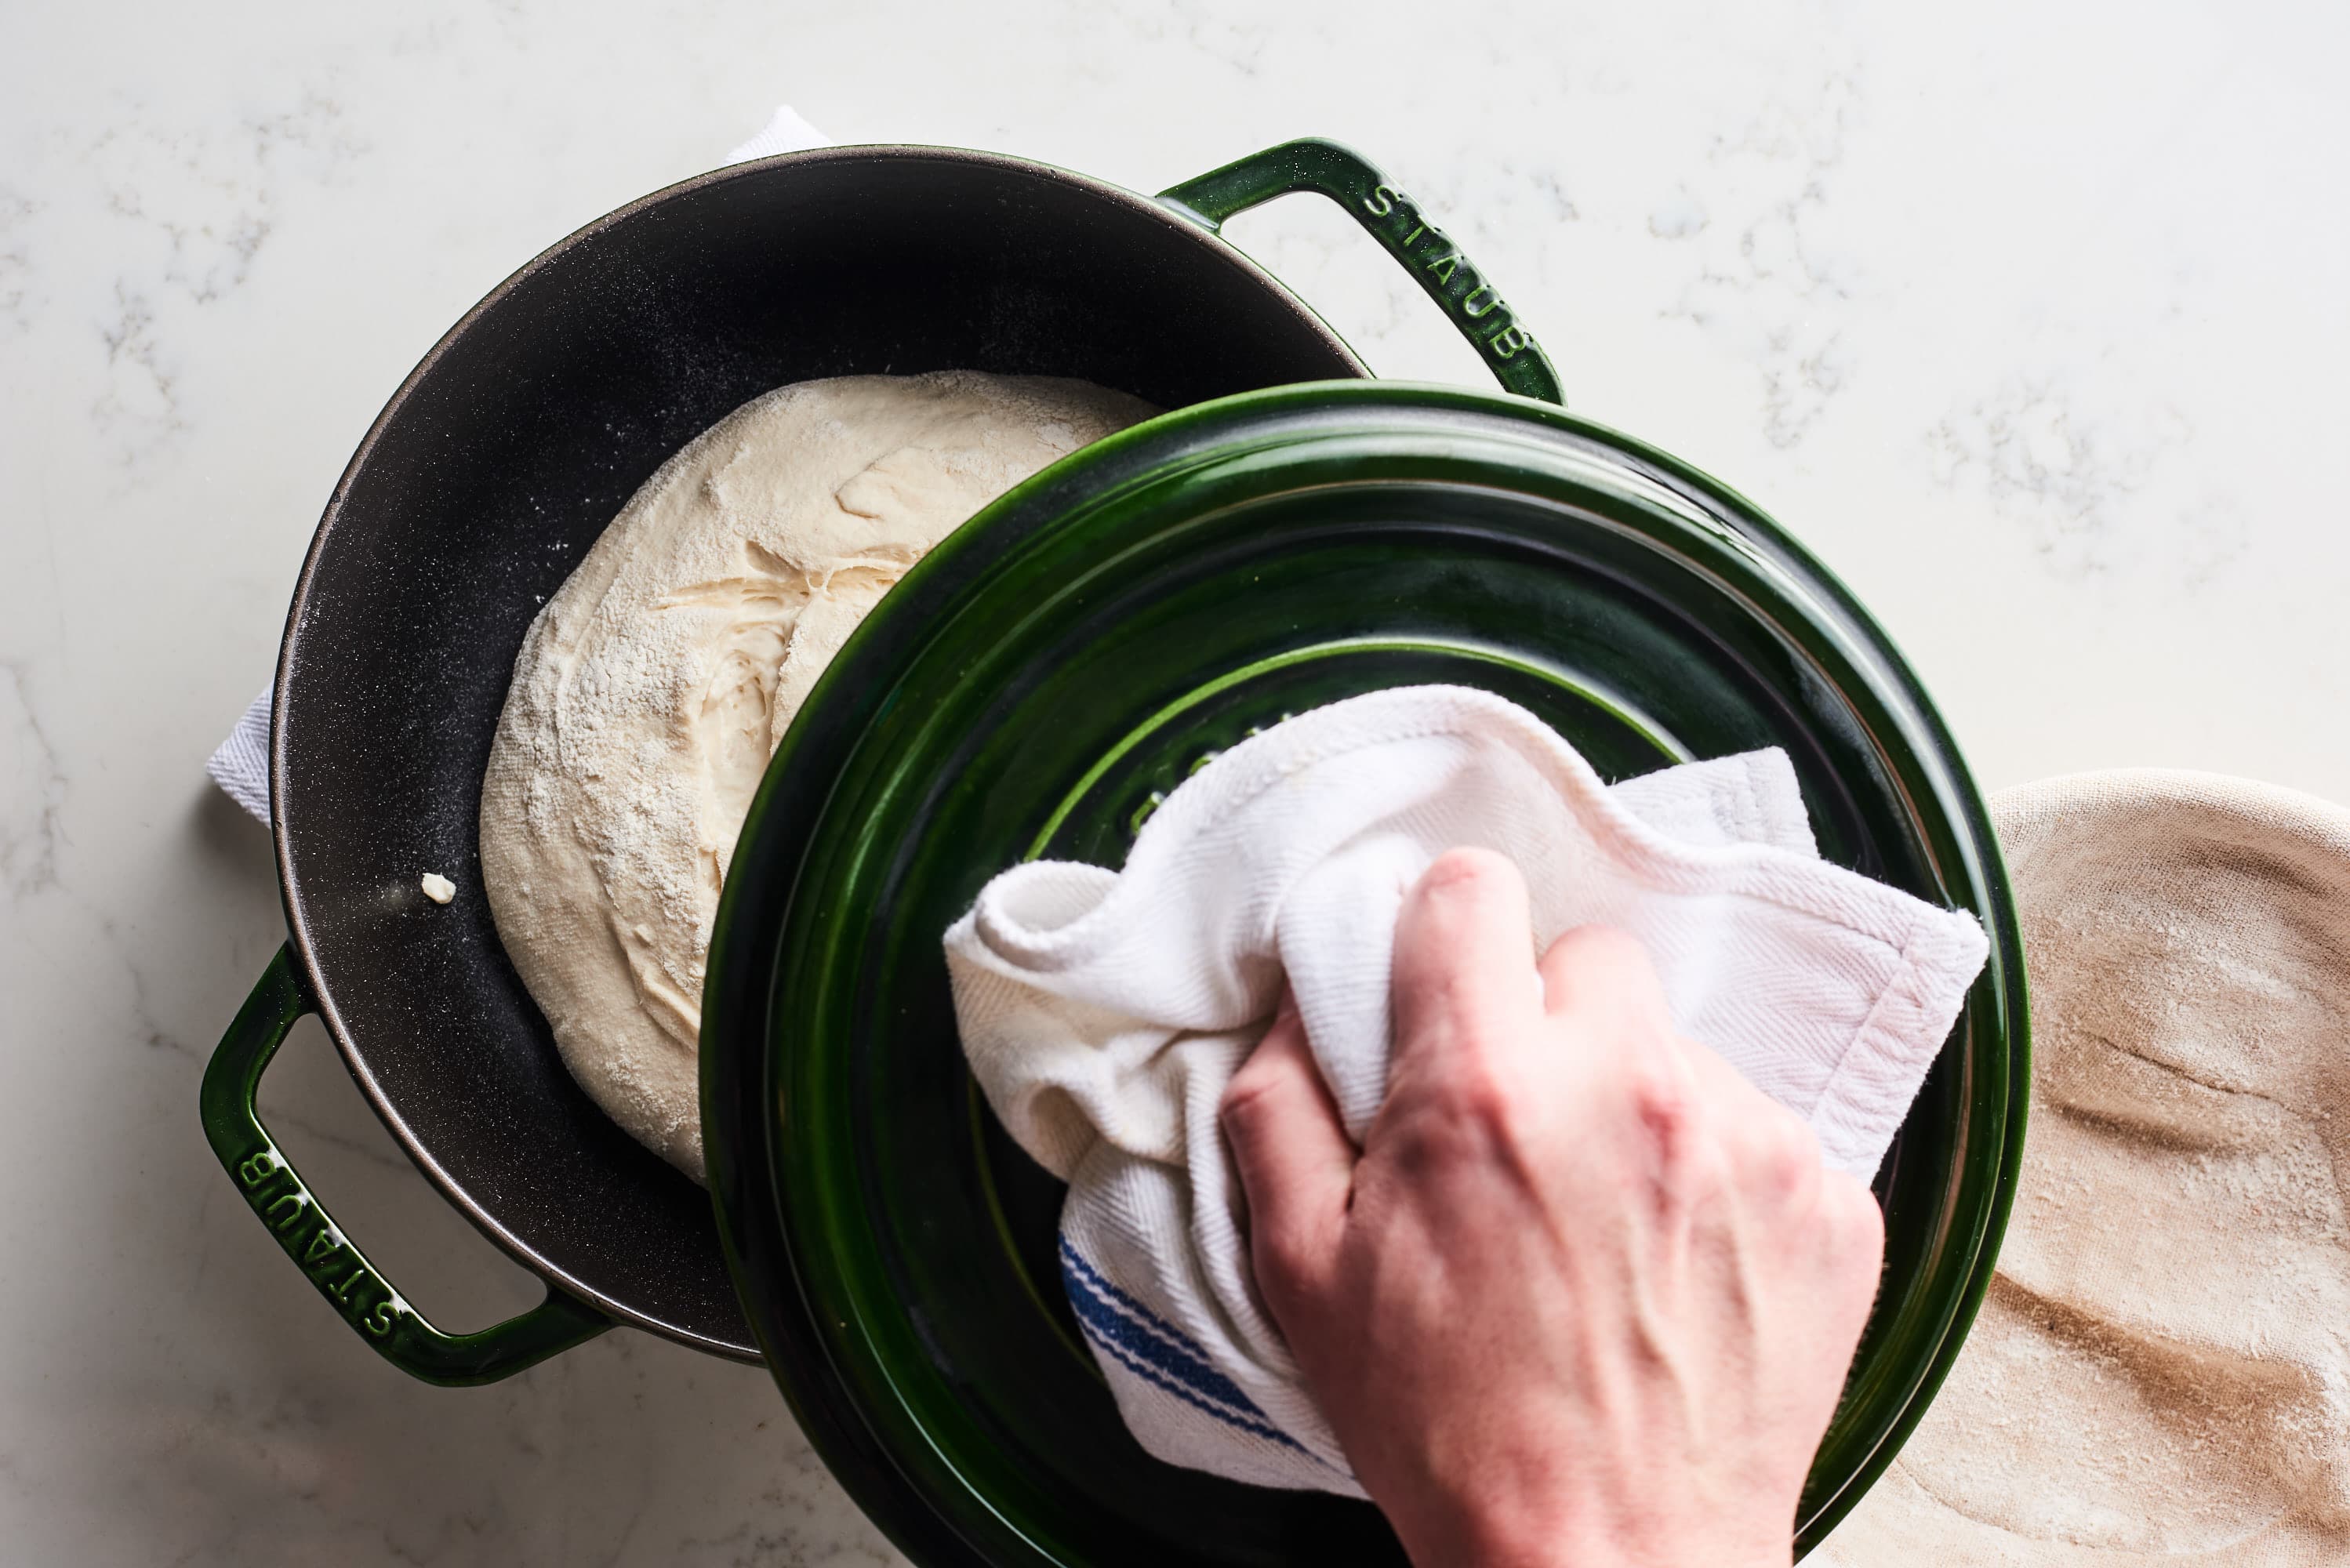 https://cdn.apartmenttherapy.info/image/upload/v1579298798/k/Photo/Recipes/2020-01-How-to-Sourdough-Bread/98733-putting-lid_How-to-make-sourdough-bread.jpg